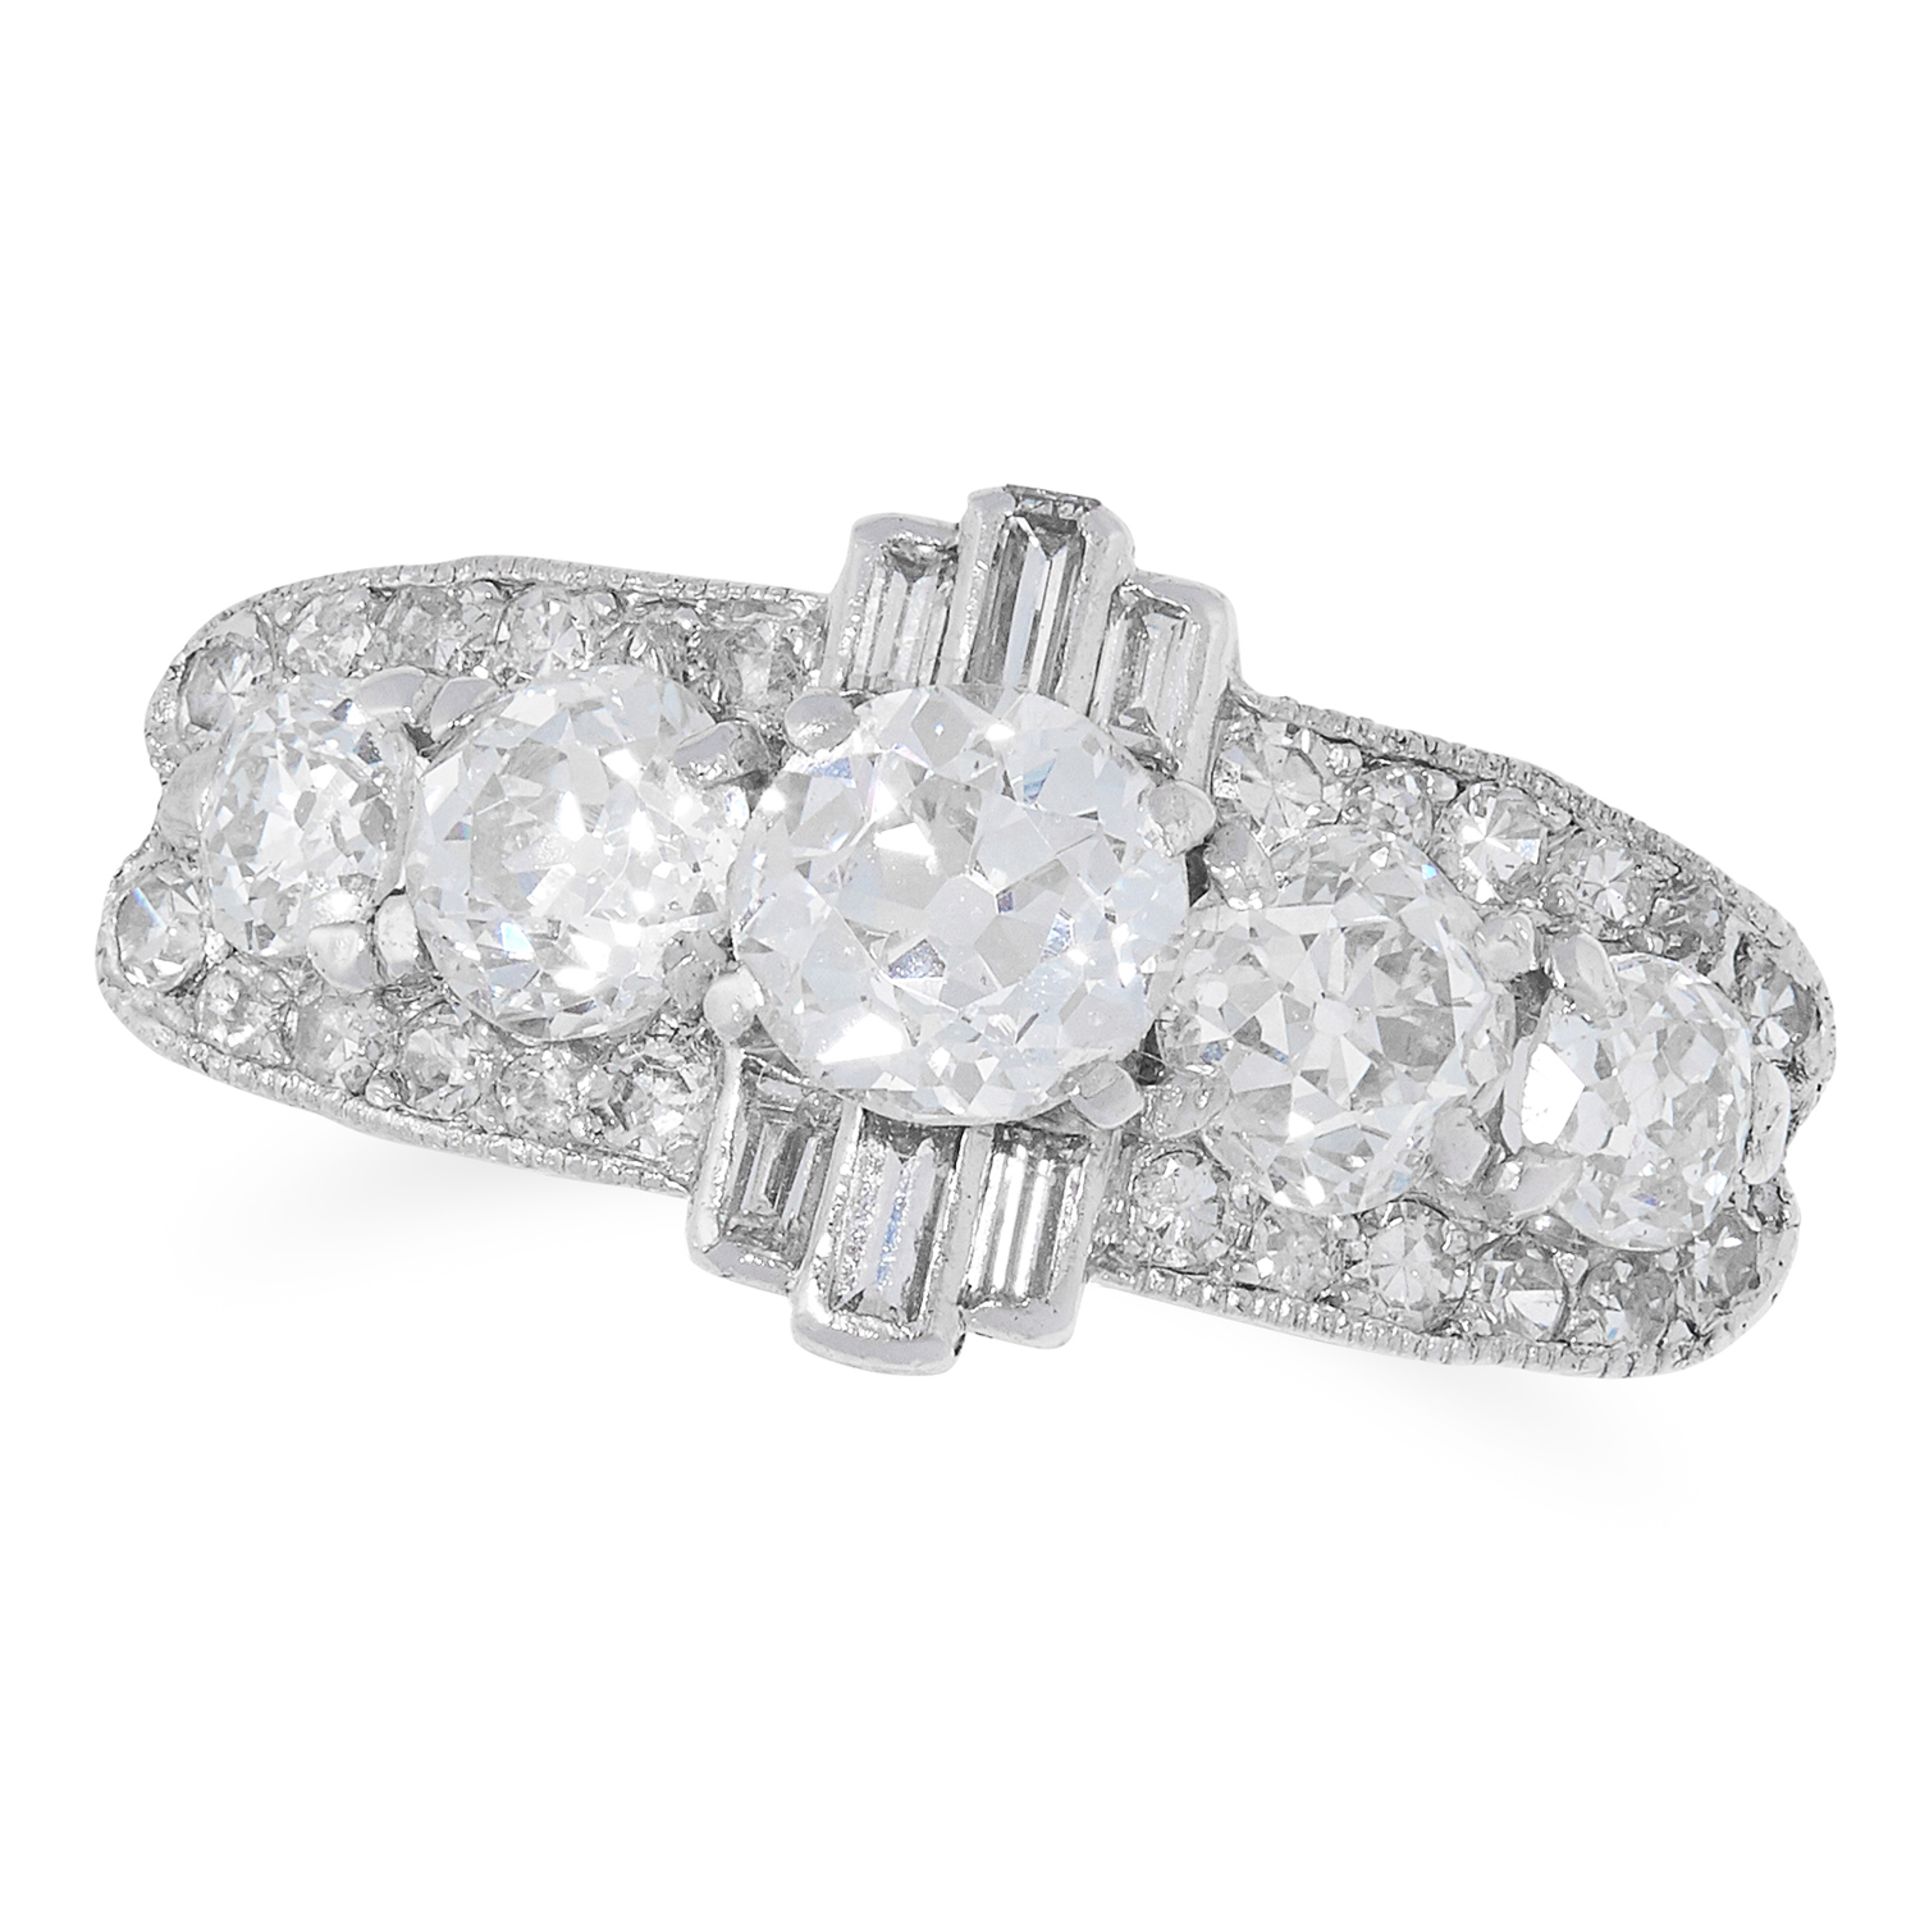 2.78 CARAT DIAMOND RING in Art Deco design set with old, round and baguette cut diamonds totalling